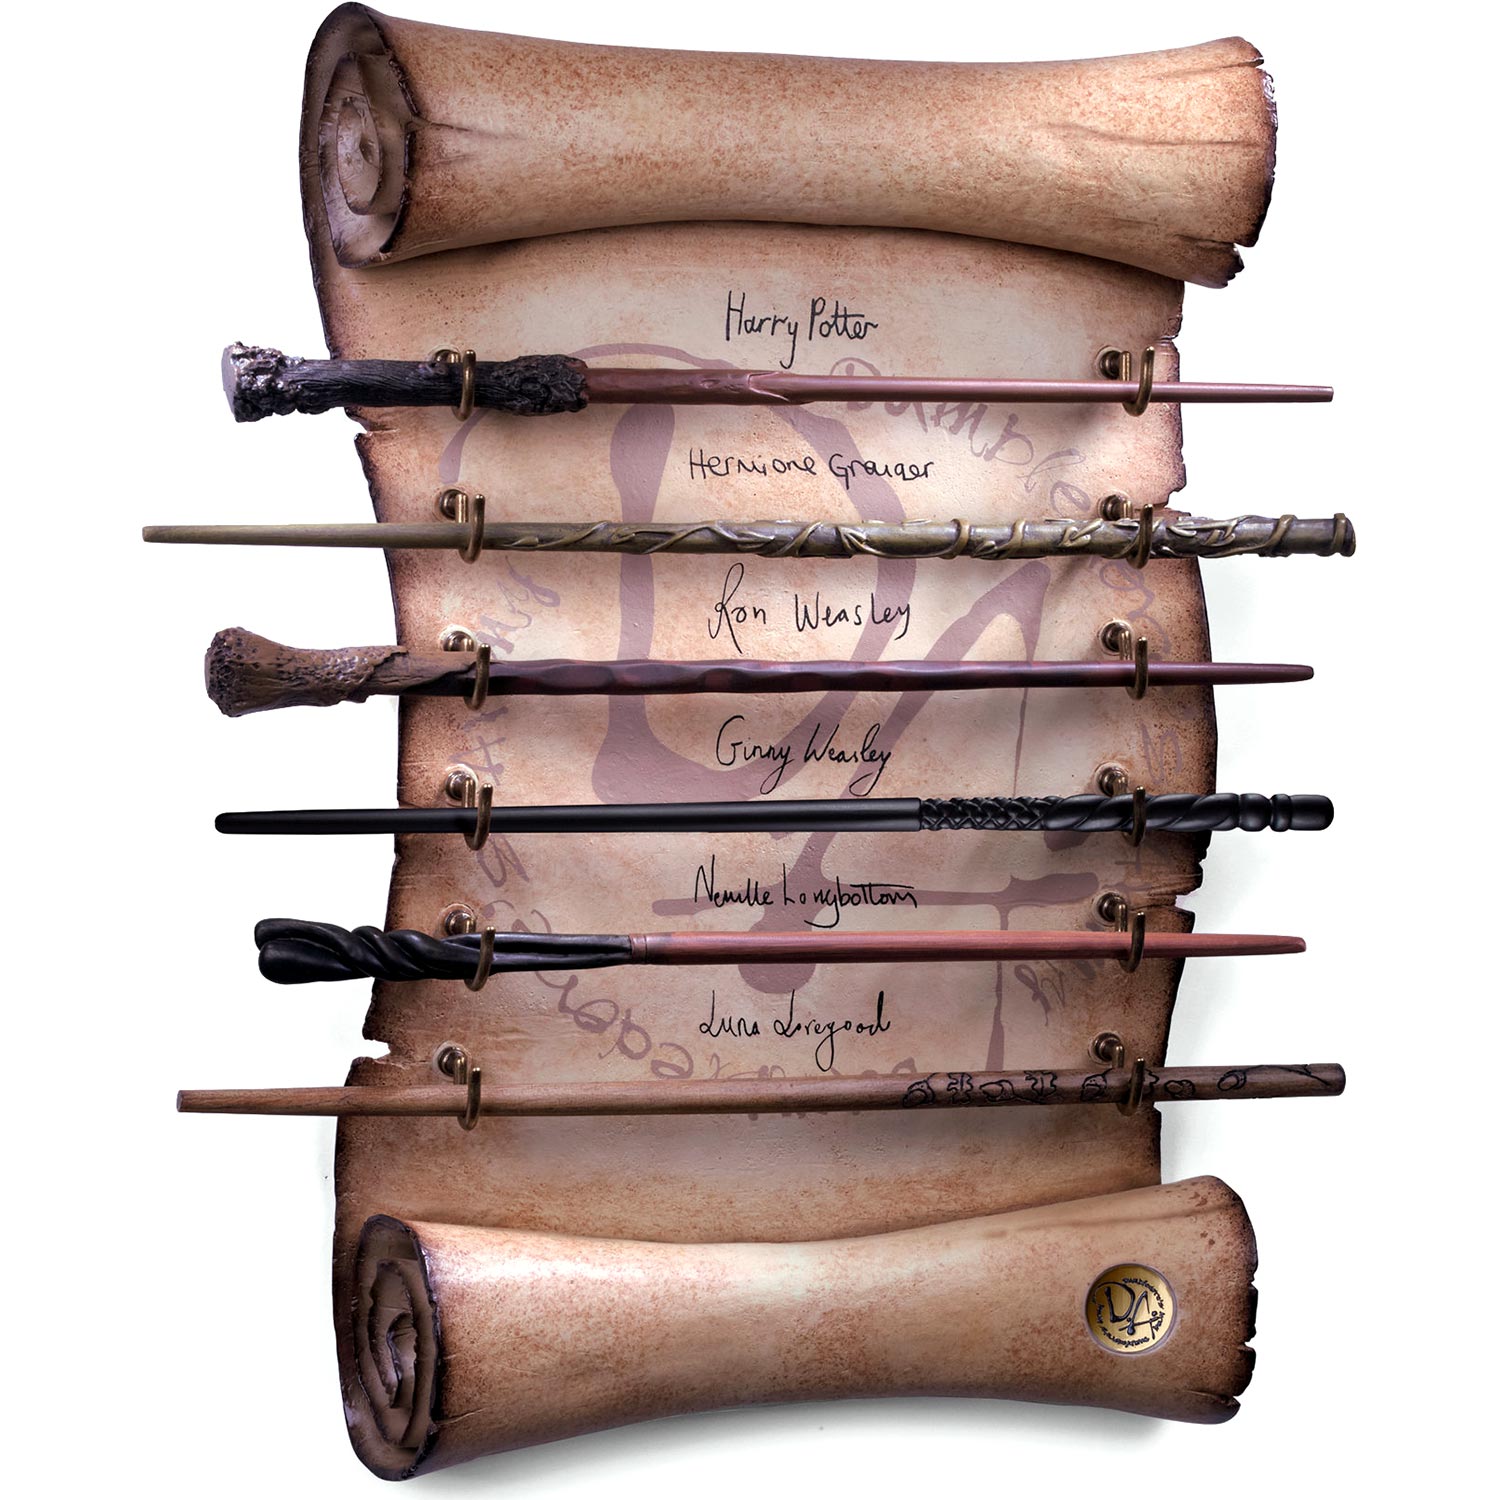 Harry Potter Dumbledore’s Army Wand Collection